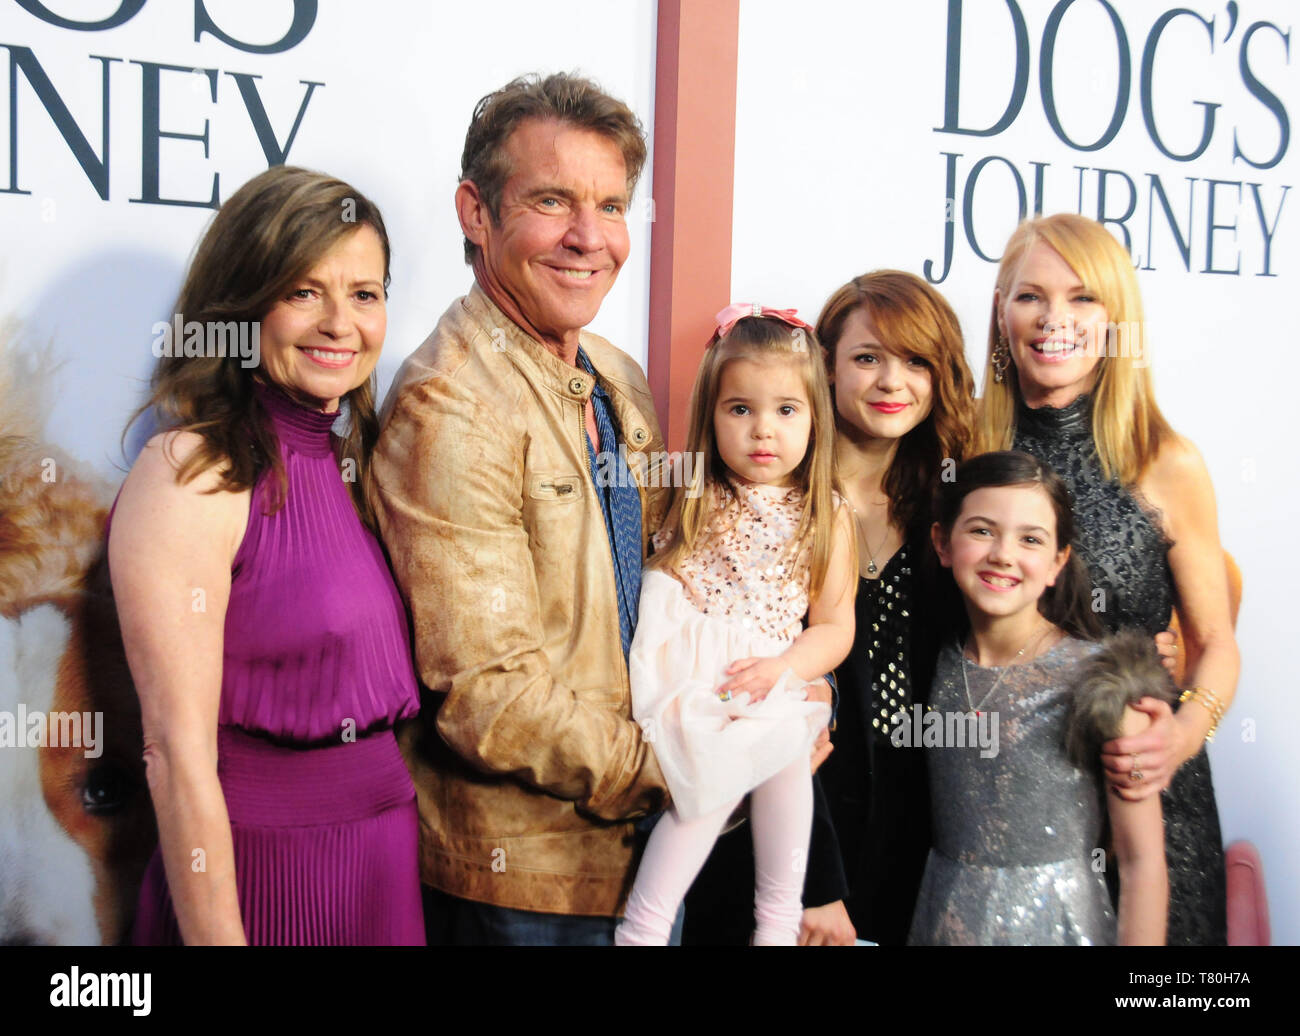 Los Angeles, California, USA 9th May 2019  Director Gail Mancuso, actor Dennis Quaid, actress Emma Volk, actress Kathryn Prescott, actress Abby Ryder Fortson and actress Marg Helgenberger attend Universal Pictures and Amblin Entertainment Present The Premiere of A Dog's Journey on May 9, 2019 at Arclight Hollywood in Los Angeles, California, USA. Photo by Barry King/Alamy Live News Stock Photo